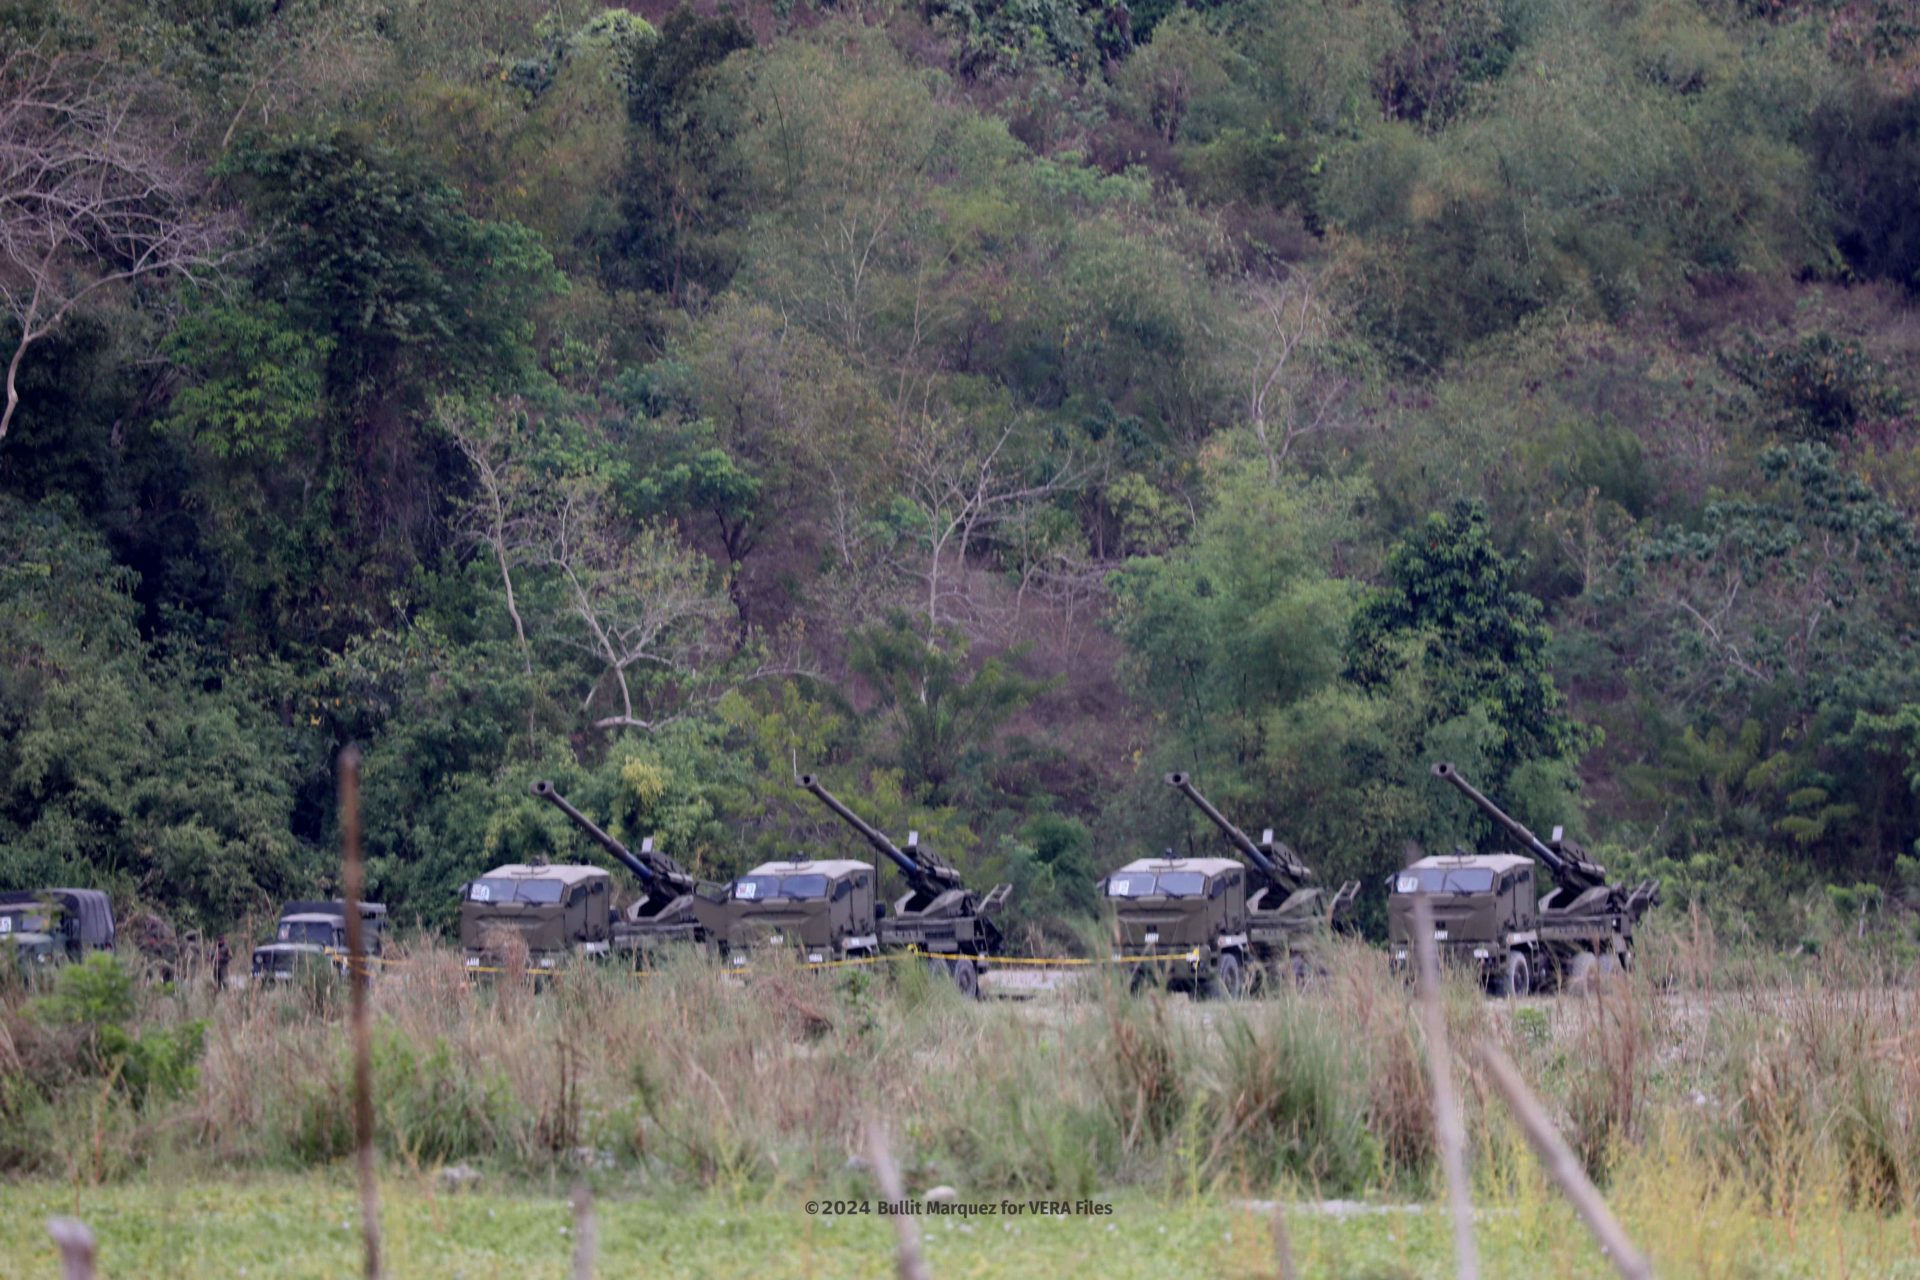 The Philippine Army shows off its territorial defense capability 1/8 Photo by Bullit Marquez for VERA Files